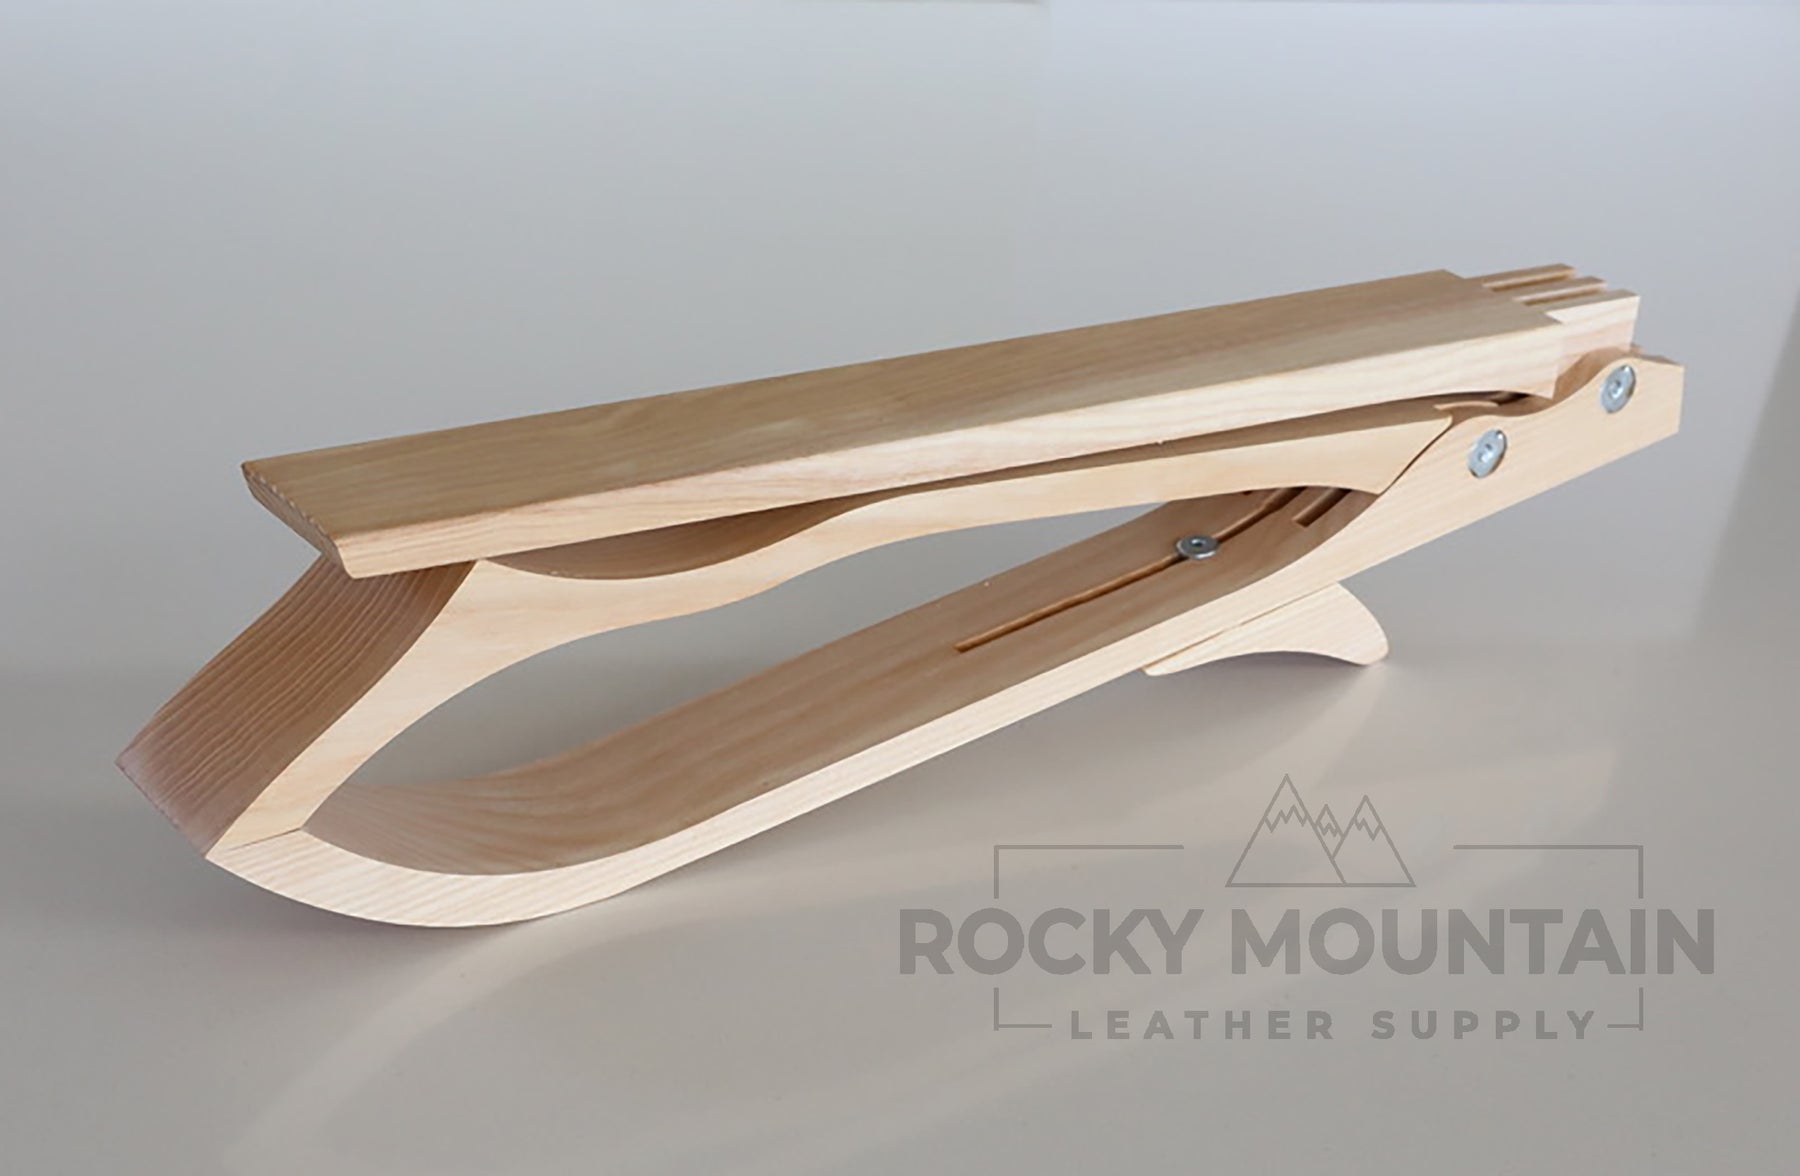 Rocky Mountain - Premium French "Adjustable" Stitching Clam - Foldable